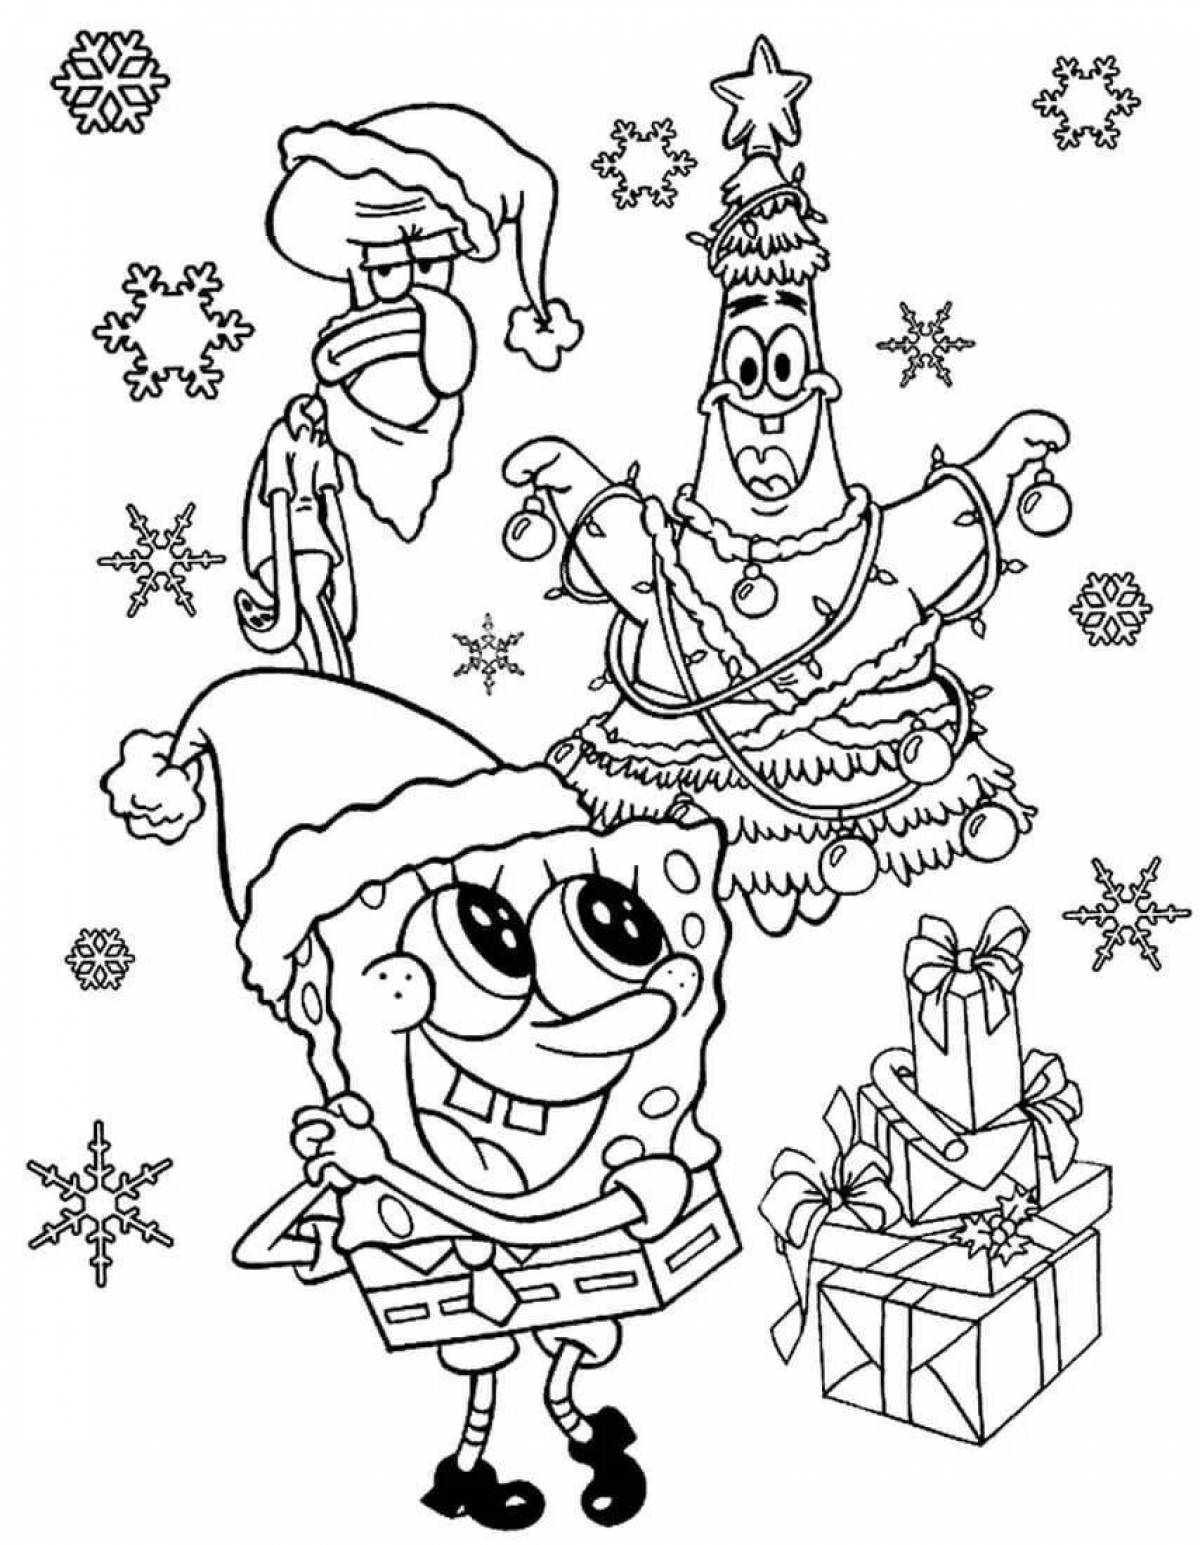 Sparkling Christmas characters coloring book